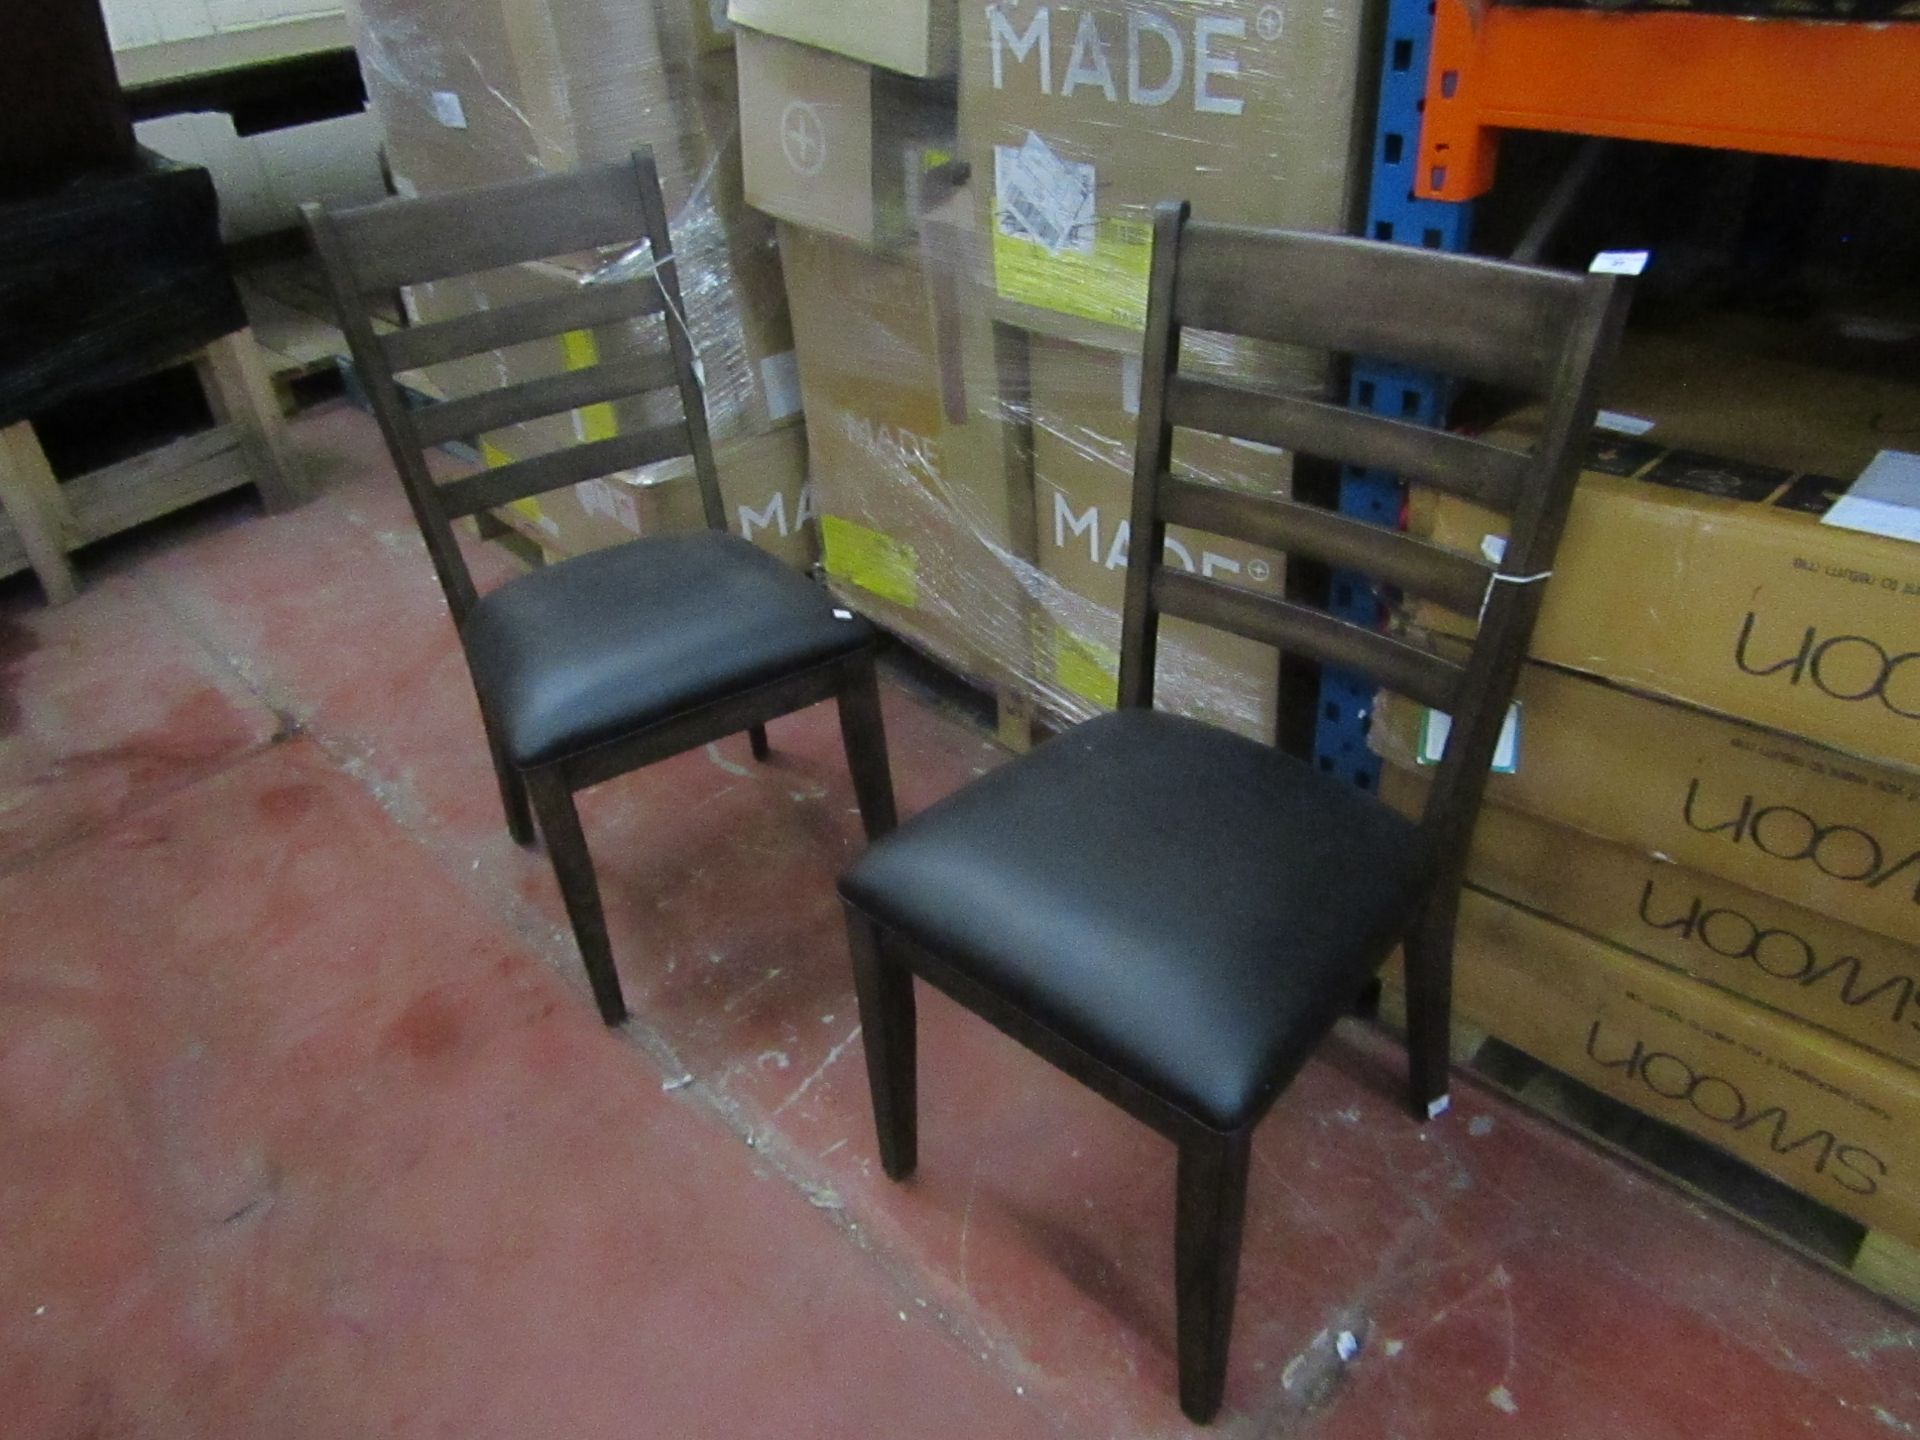 2X Bayside Furnishings Wooden dining chairs, both may have slight marks and scuffs but overall in